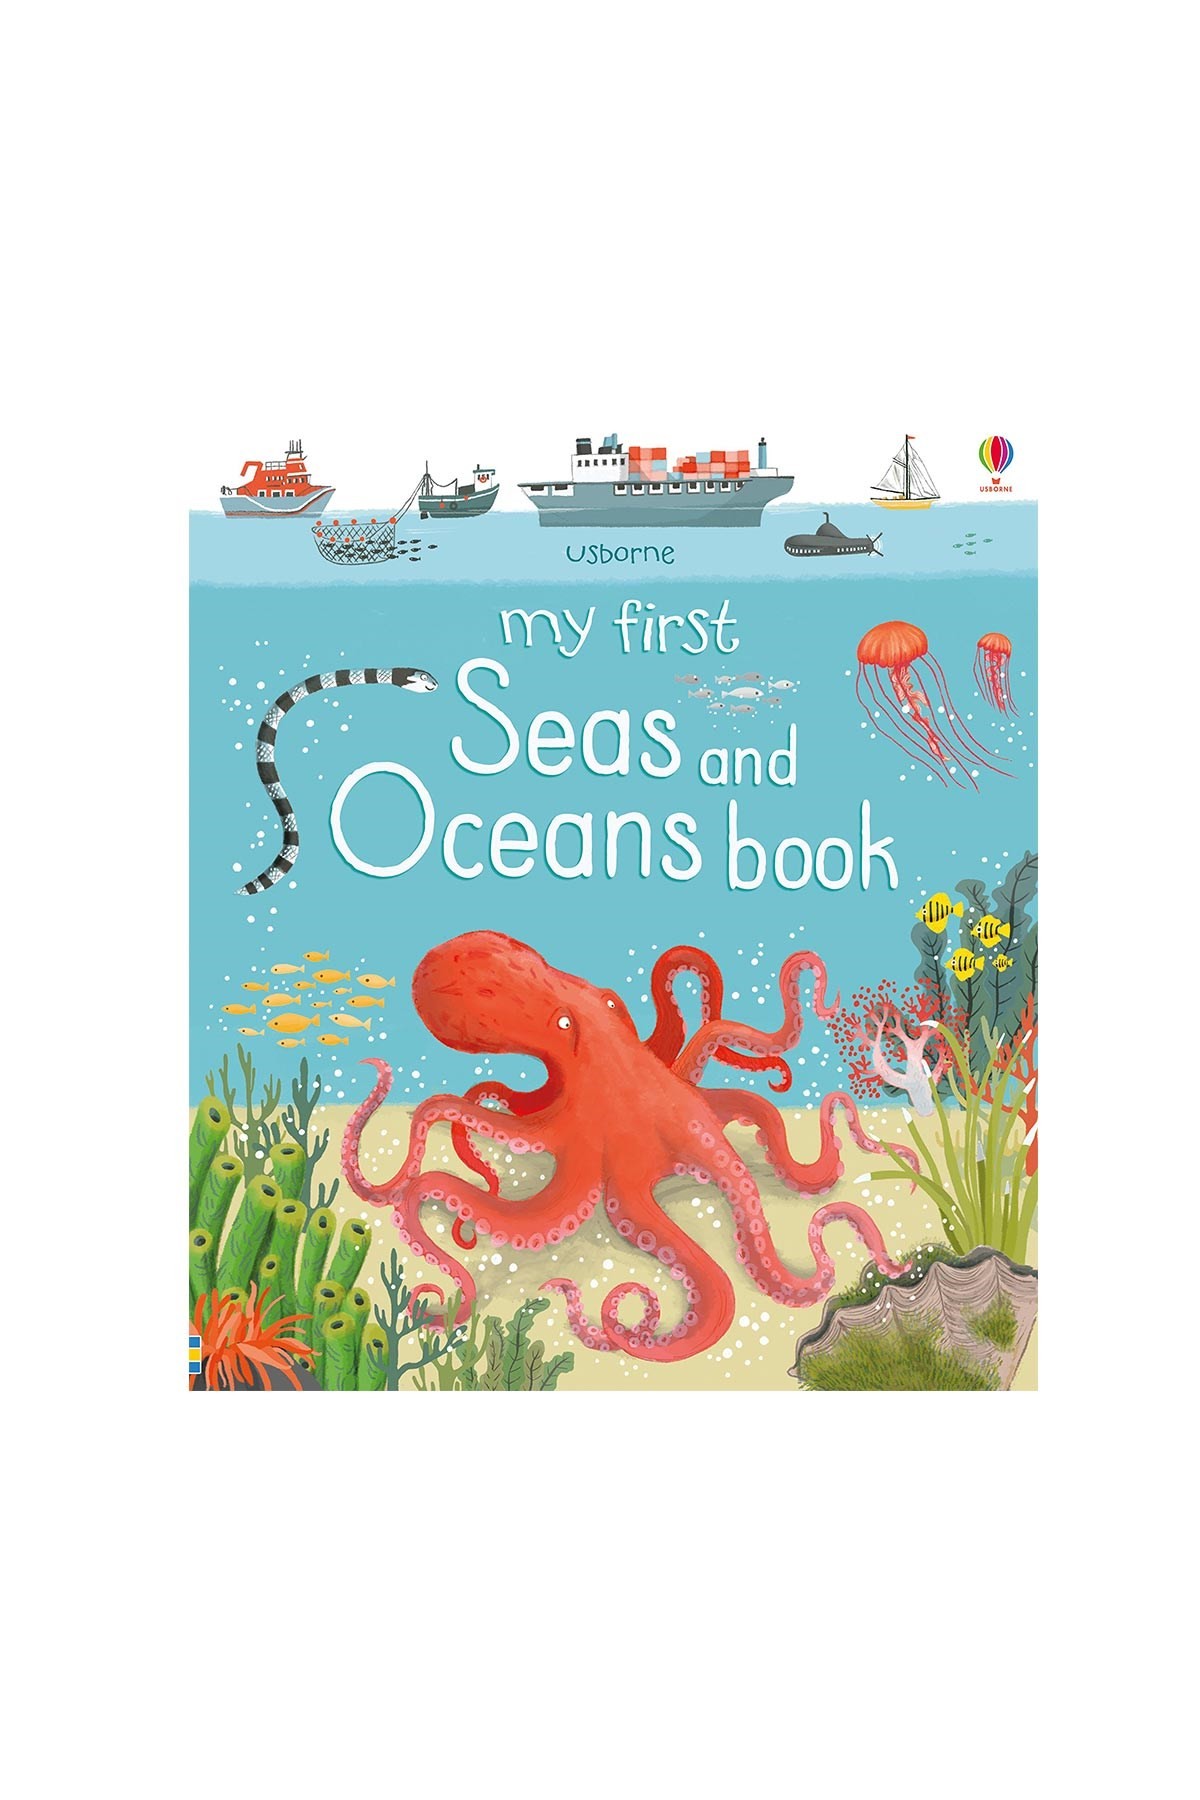 The Usborne My First Seas And Oceans Book